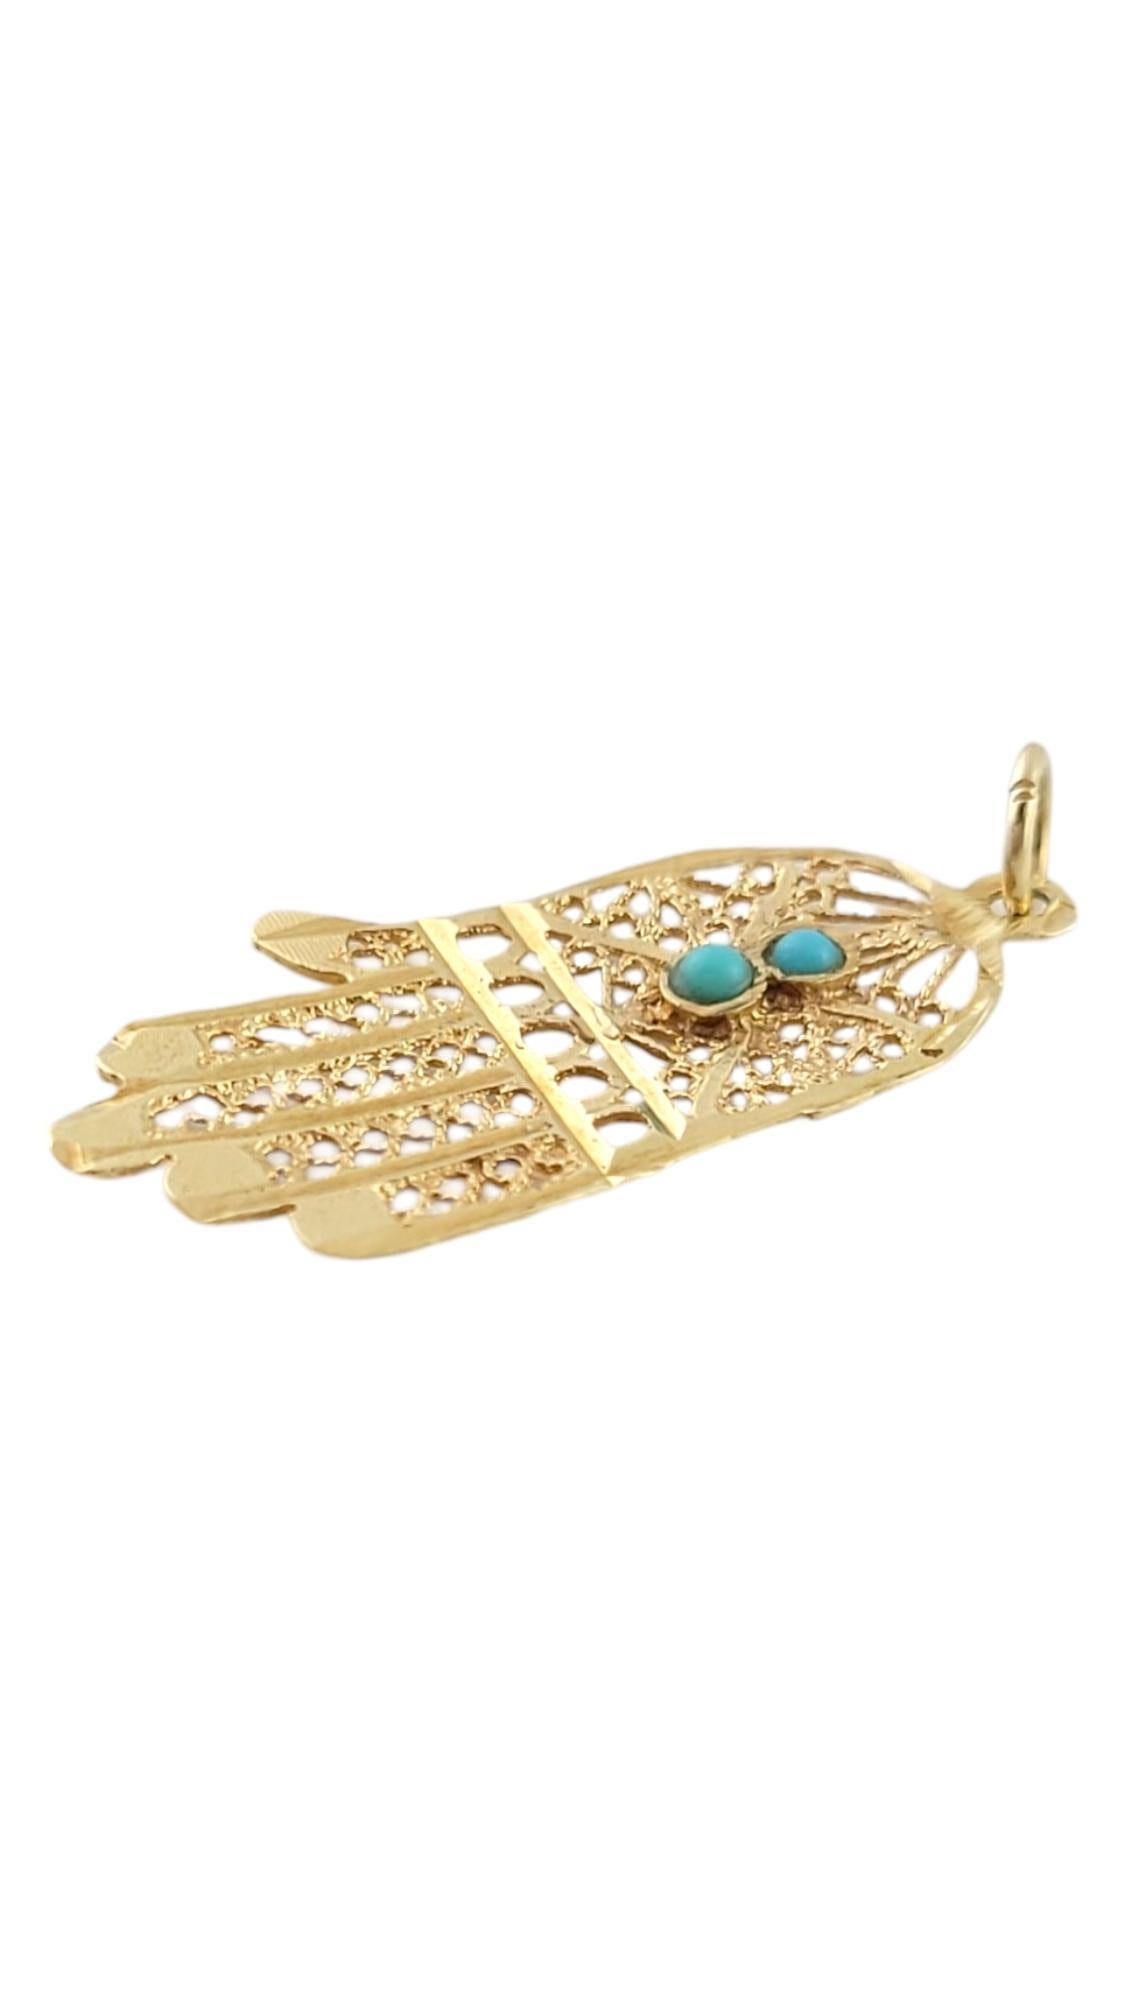 Vintage 14K Yellow Gold Hamsa Hand Charm with Turquoise Stones

This gorgeous charm is crafted with beautiful detail from 14K yellow gold and features 2 stunning turquoise stones!

Size: 28.84mm X 14.2mm X 1.87mm
Length w/ bail: 32.37mm

Weight: